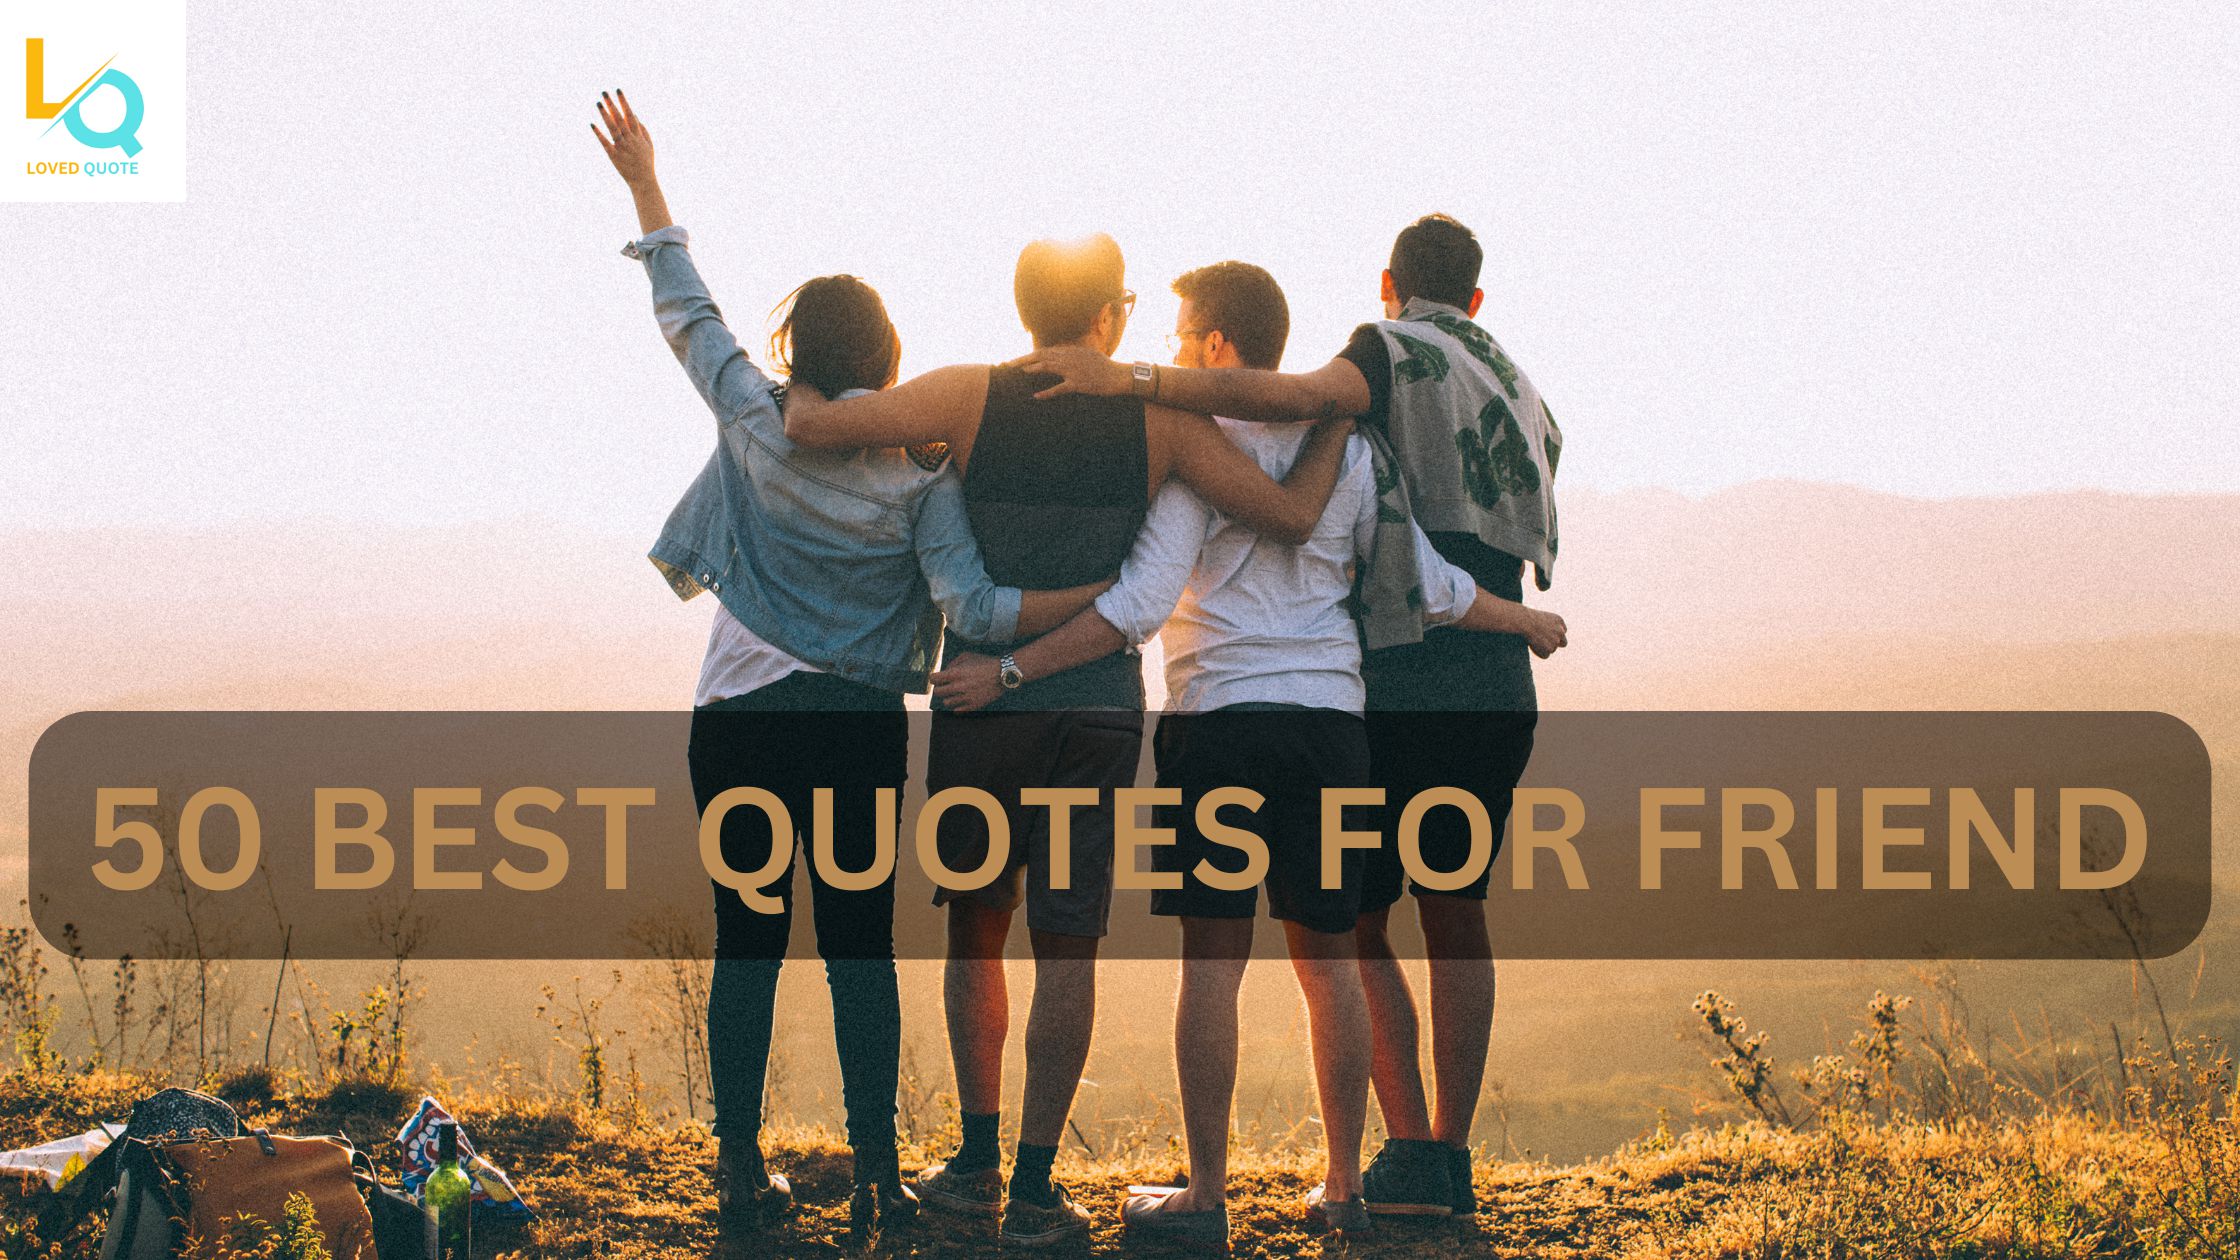 50 Best Quotes for Friend